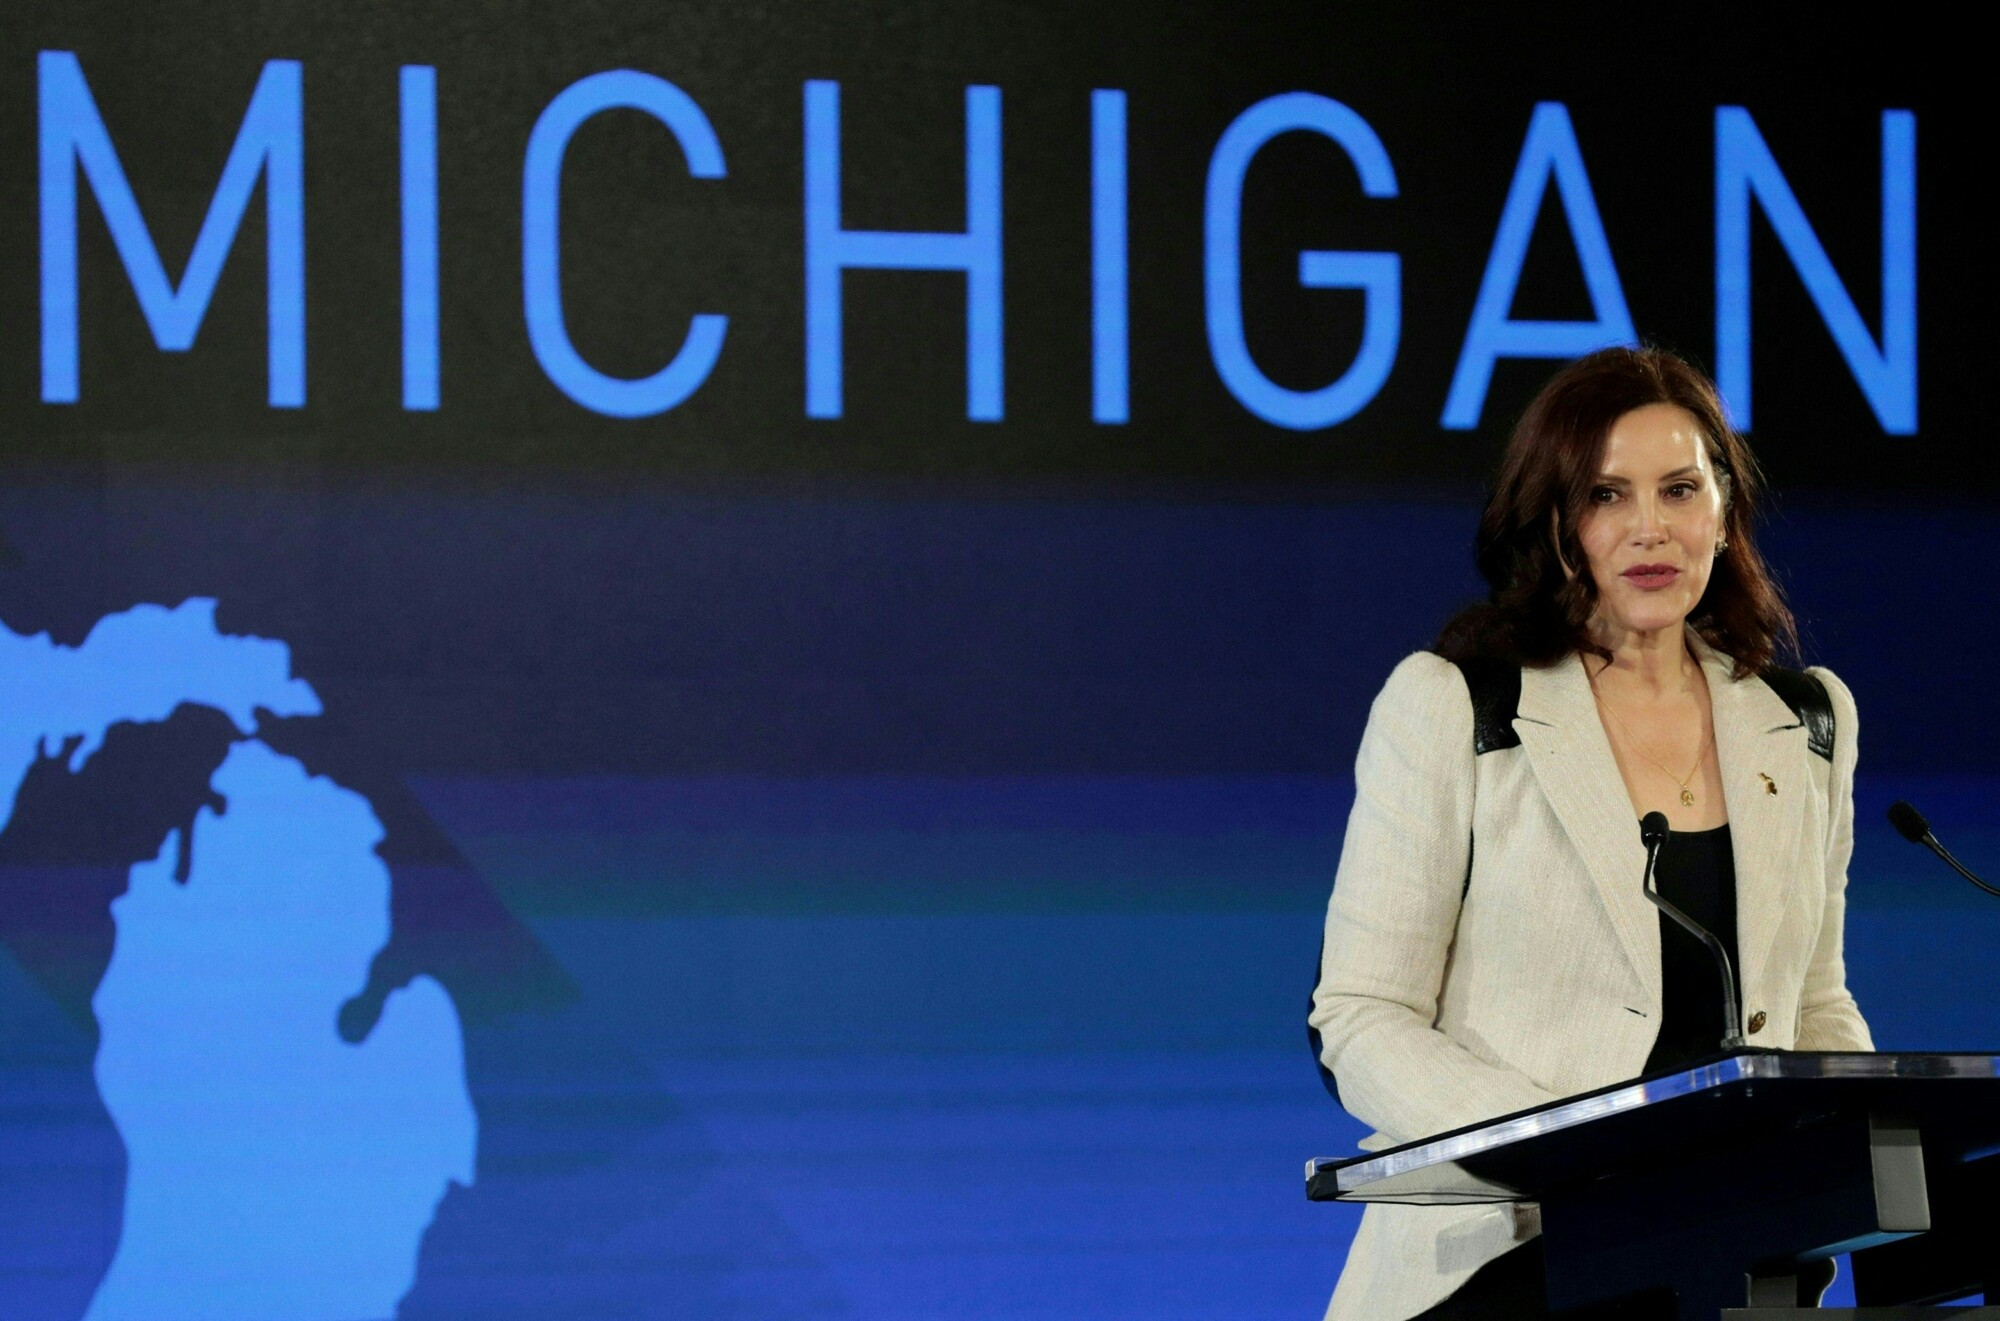 2 Acquitted, Mistrial Declared for 2 Others in Michigan Gov. Whitmer Kidnap Plot